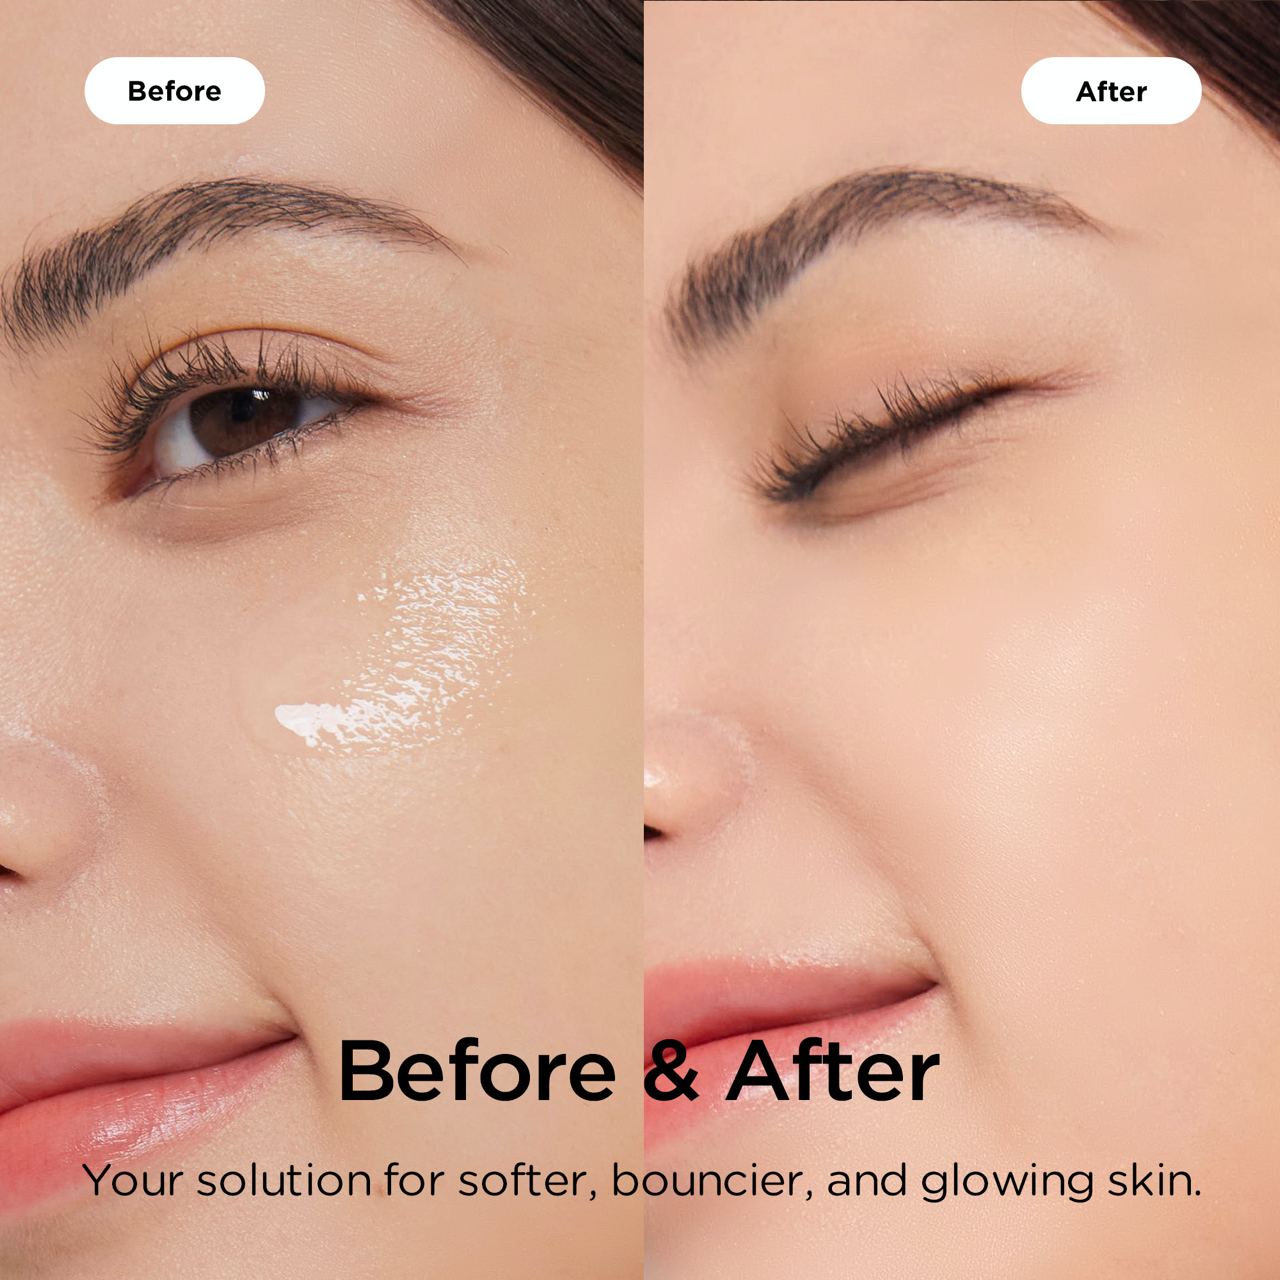 Before and after comparison of Avarelle's Vitamin C Brightening Complex Cream, now featuring Sea Buckthorn, showing improved skin texture and radiance.